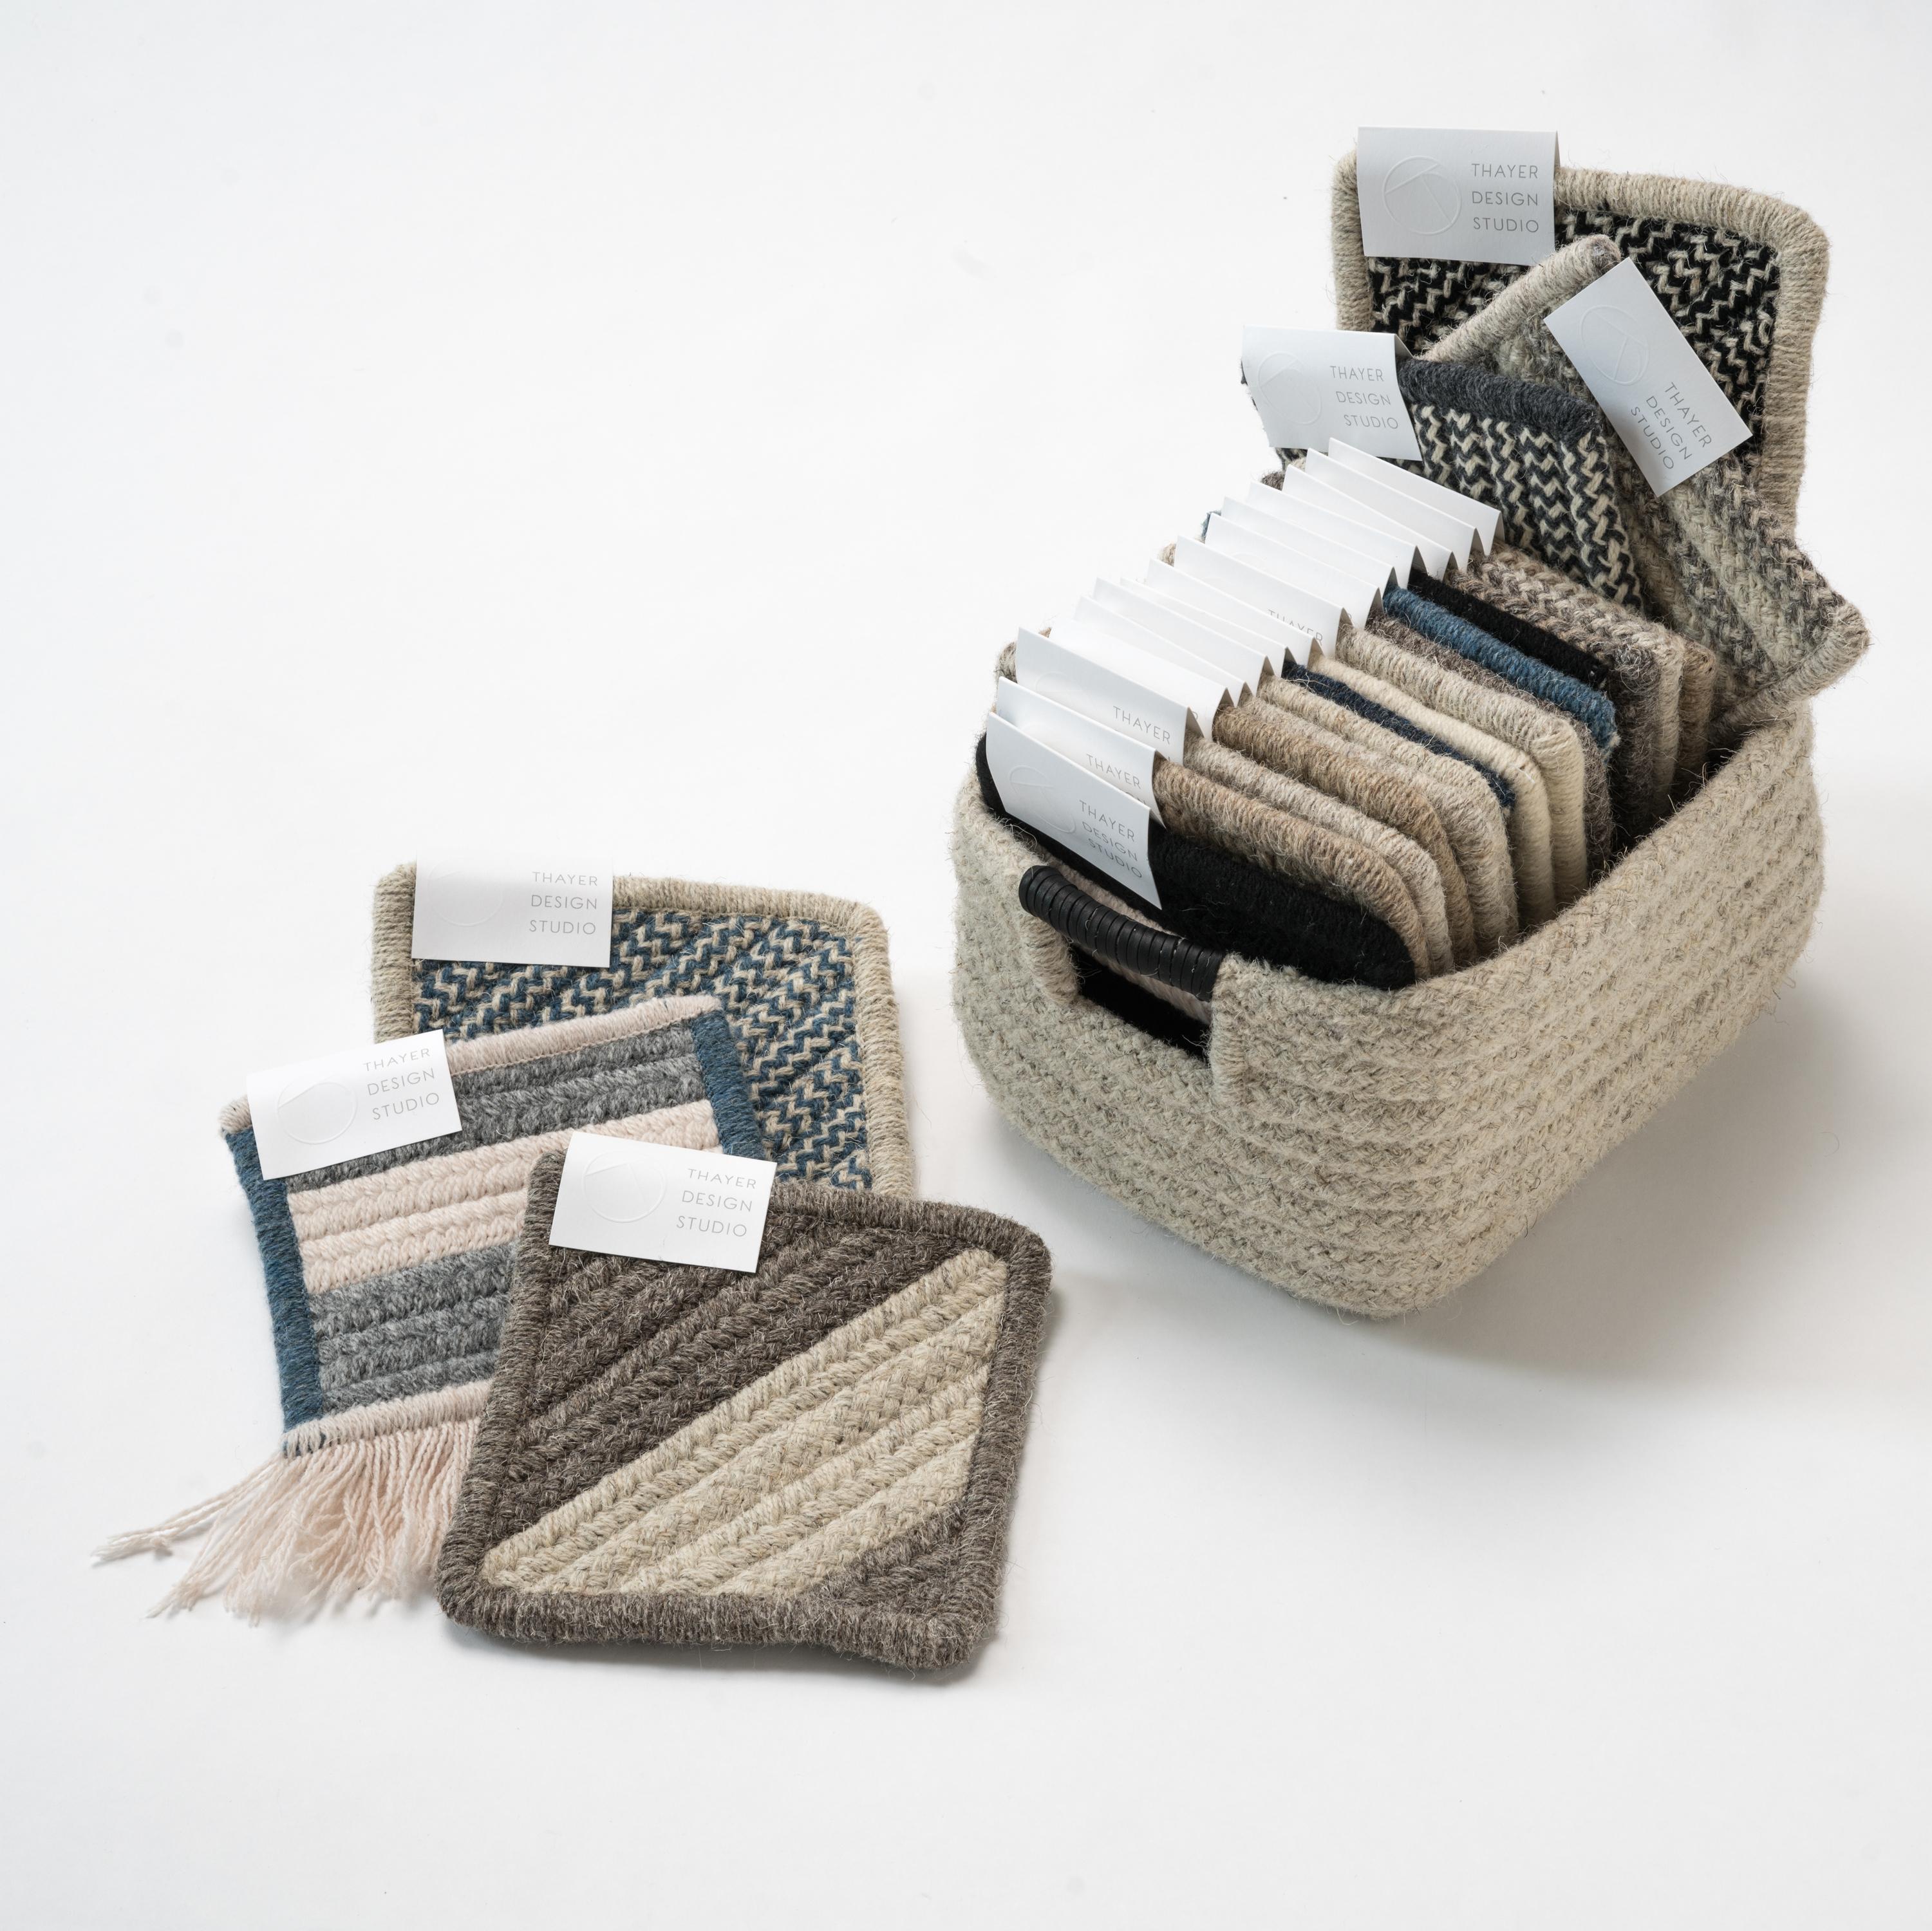 Organic Modern Natural Wool Basket in Light Grey, Leather Wrap Handles, Woven in the USA For Sale